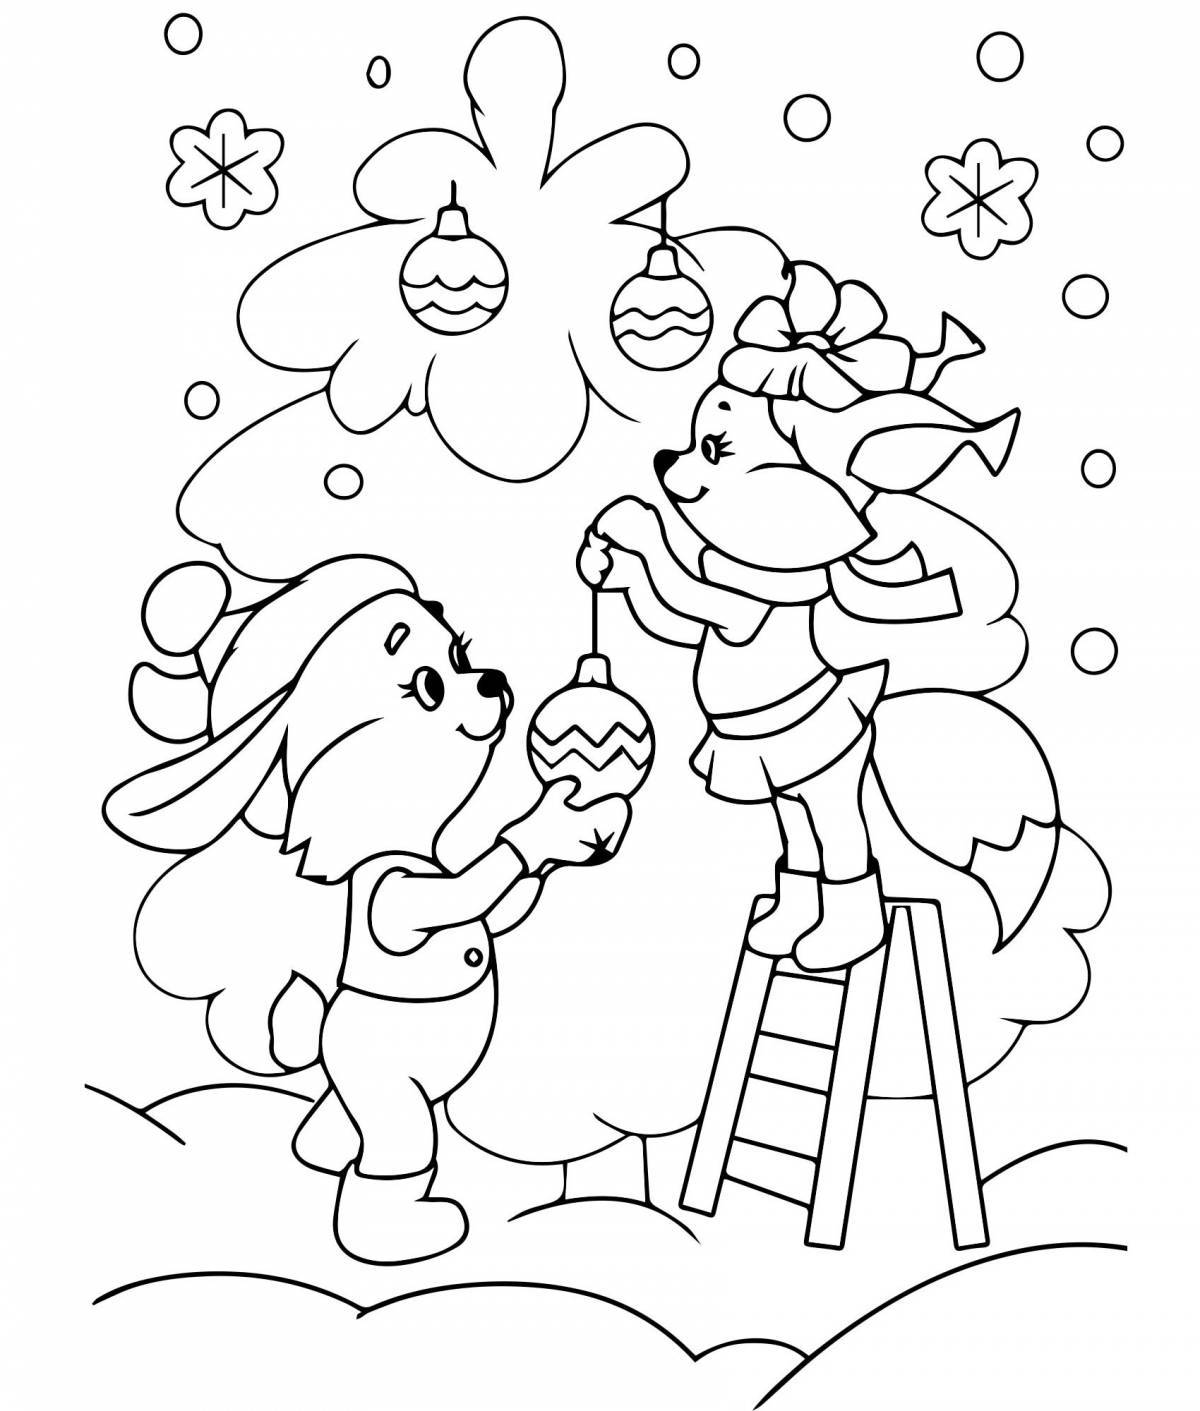 Delightful winter coloring book for kids 6-7 years old